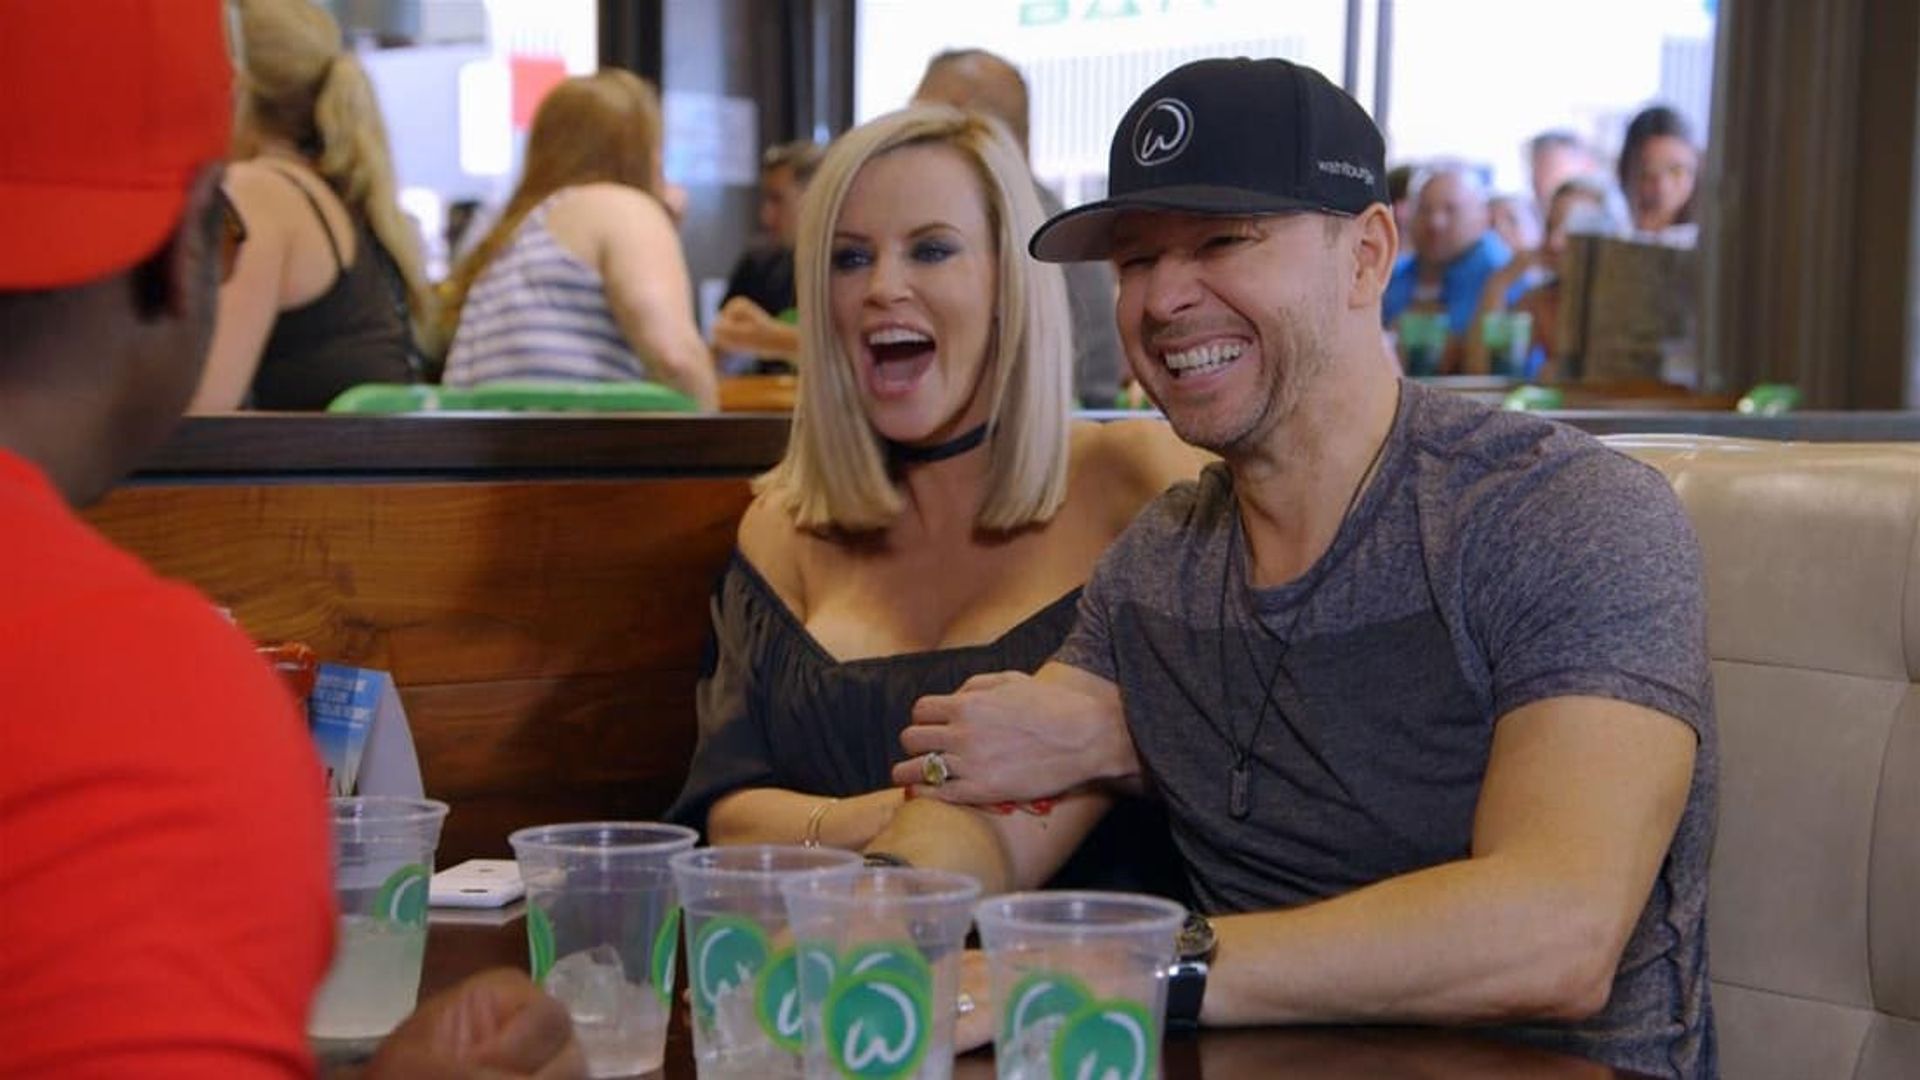 Wahlburgers background